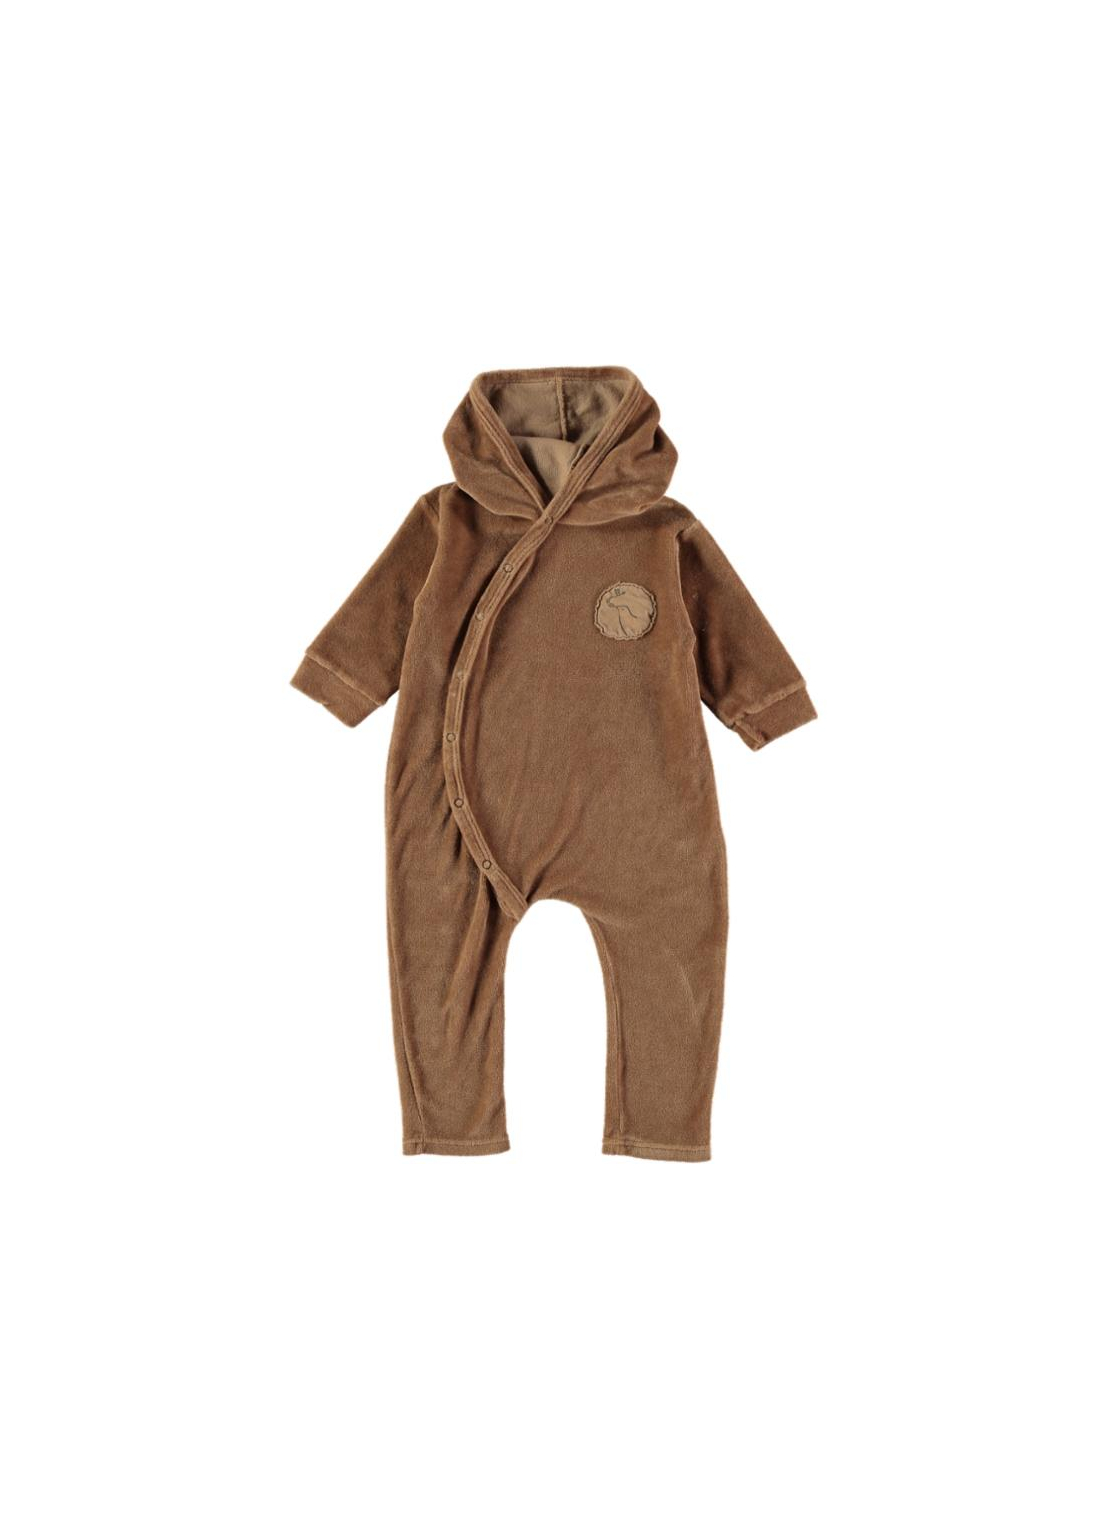 Baby ROMPER Unisex- 85% Organic Cotton 15% PES - knitted